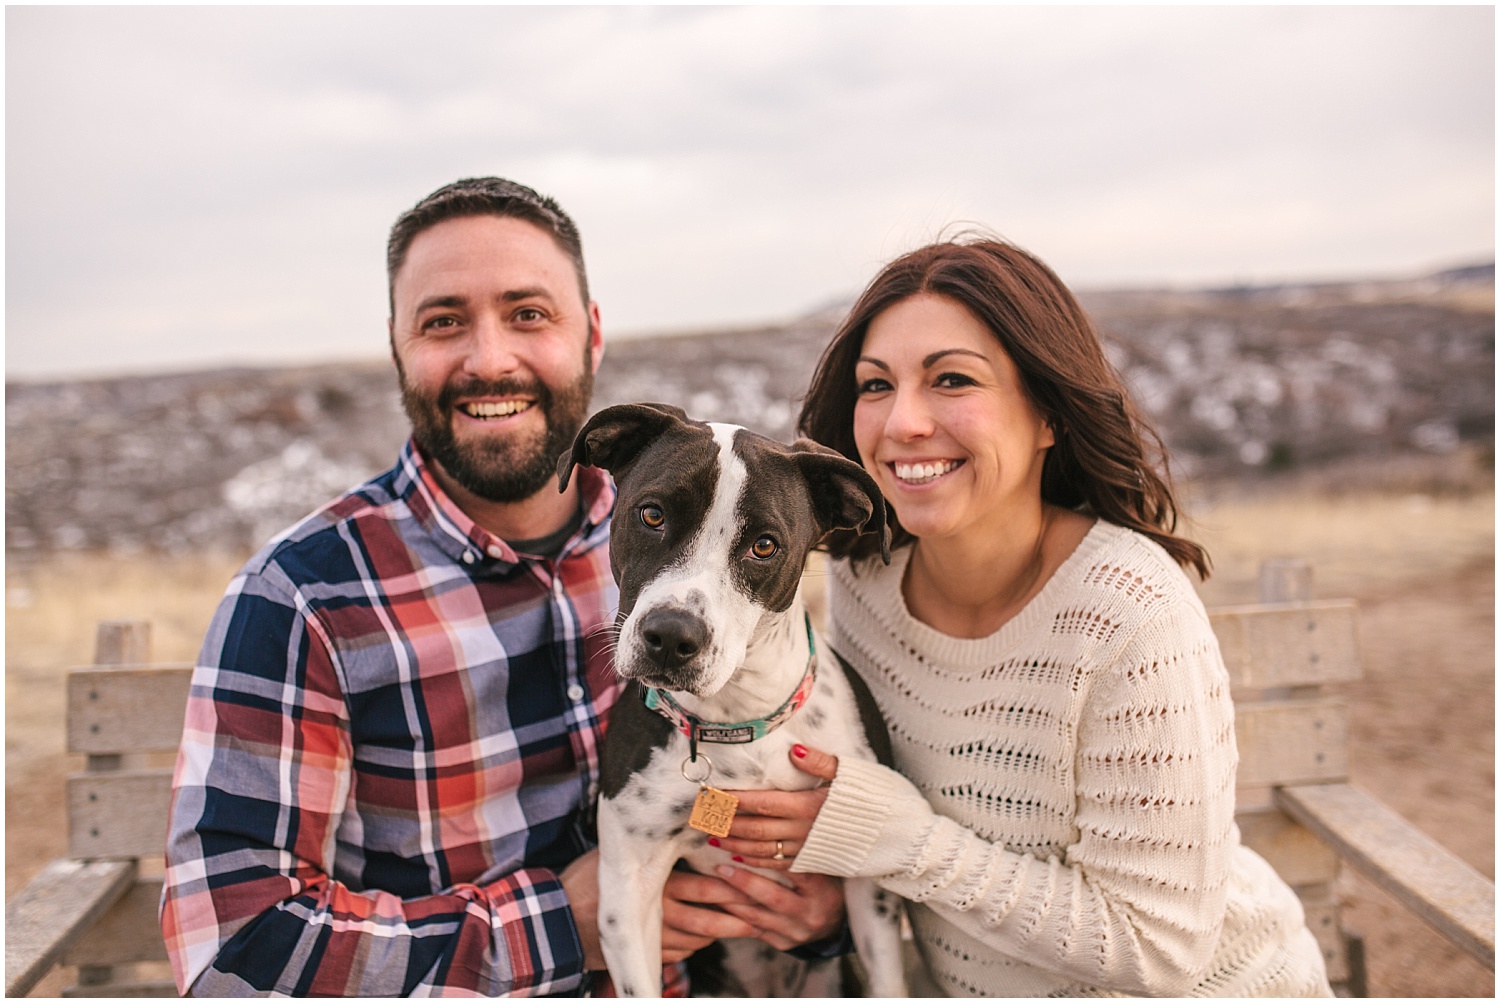 Castle Rock Colorado engagement photos featuring a very loving pup.